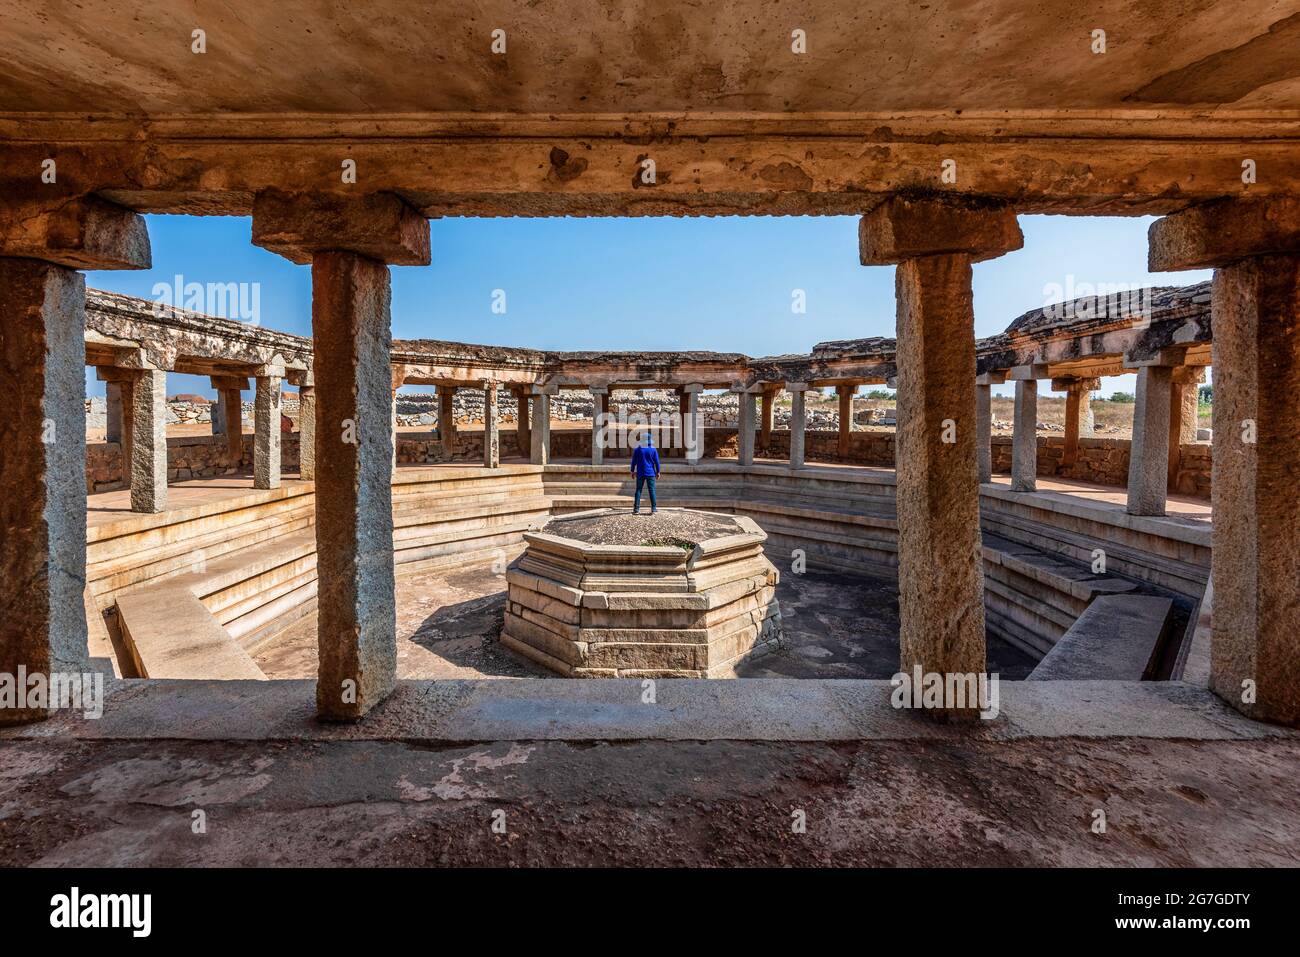 Octagonal Bath, This structure, as the name indicates, is a gigantic bathing area made in the shape of an Octagon, Hampi, Karnataka, India Stock Photo